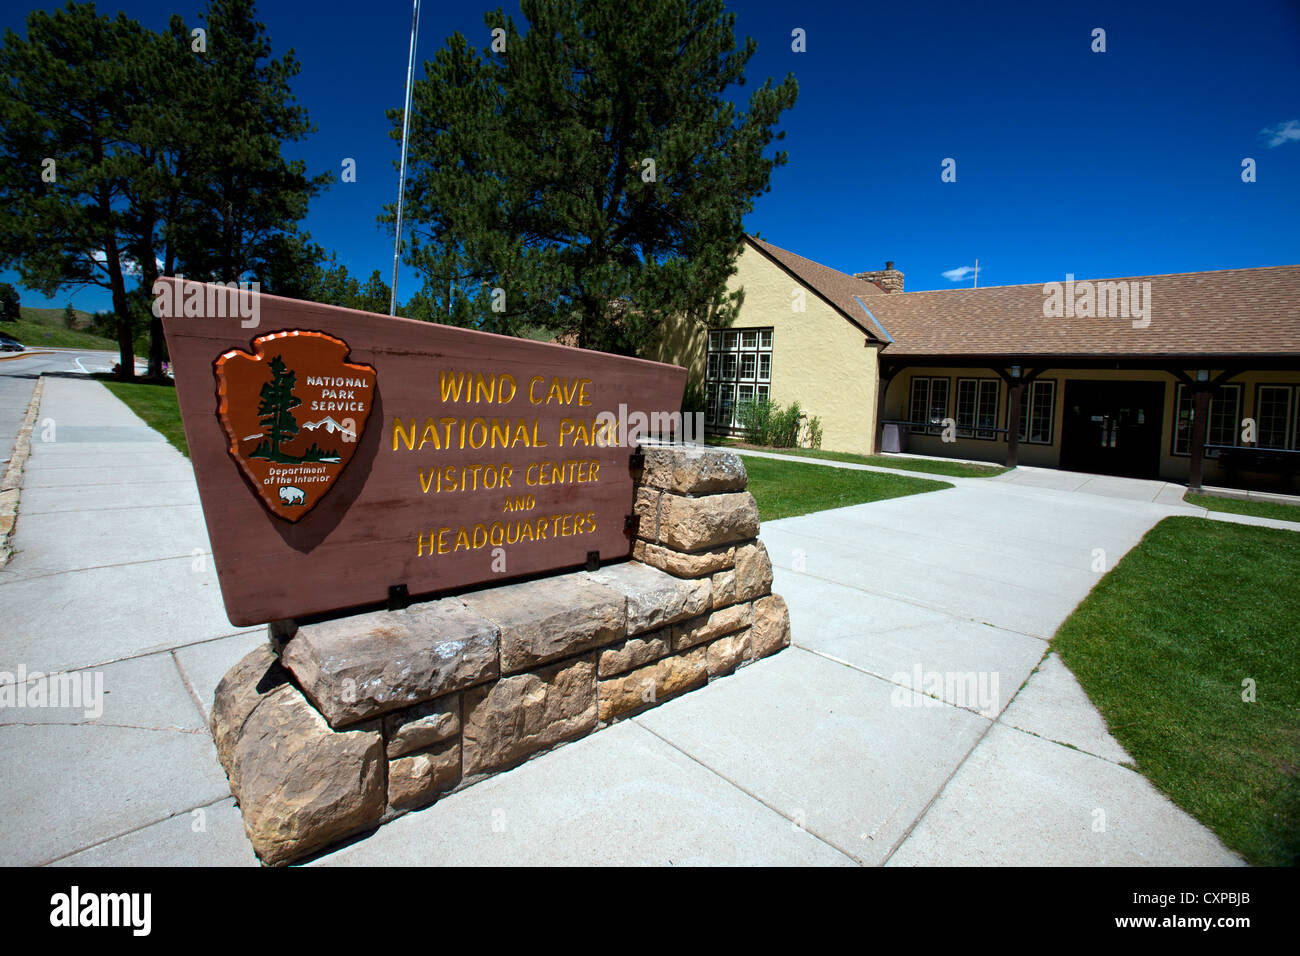 National Park Service sign outside Visitor Center and Headquarters, Wind Cave National Park, South Dakota, USA Stock Photo